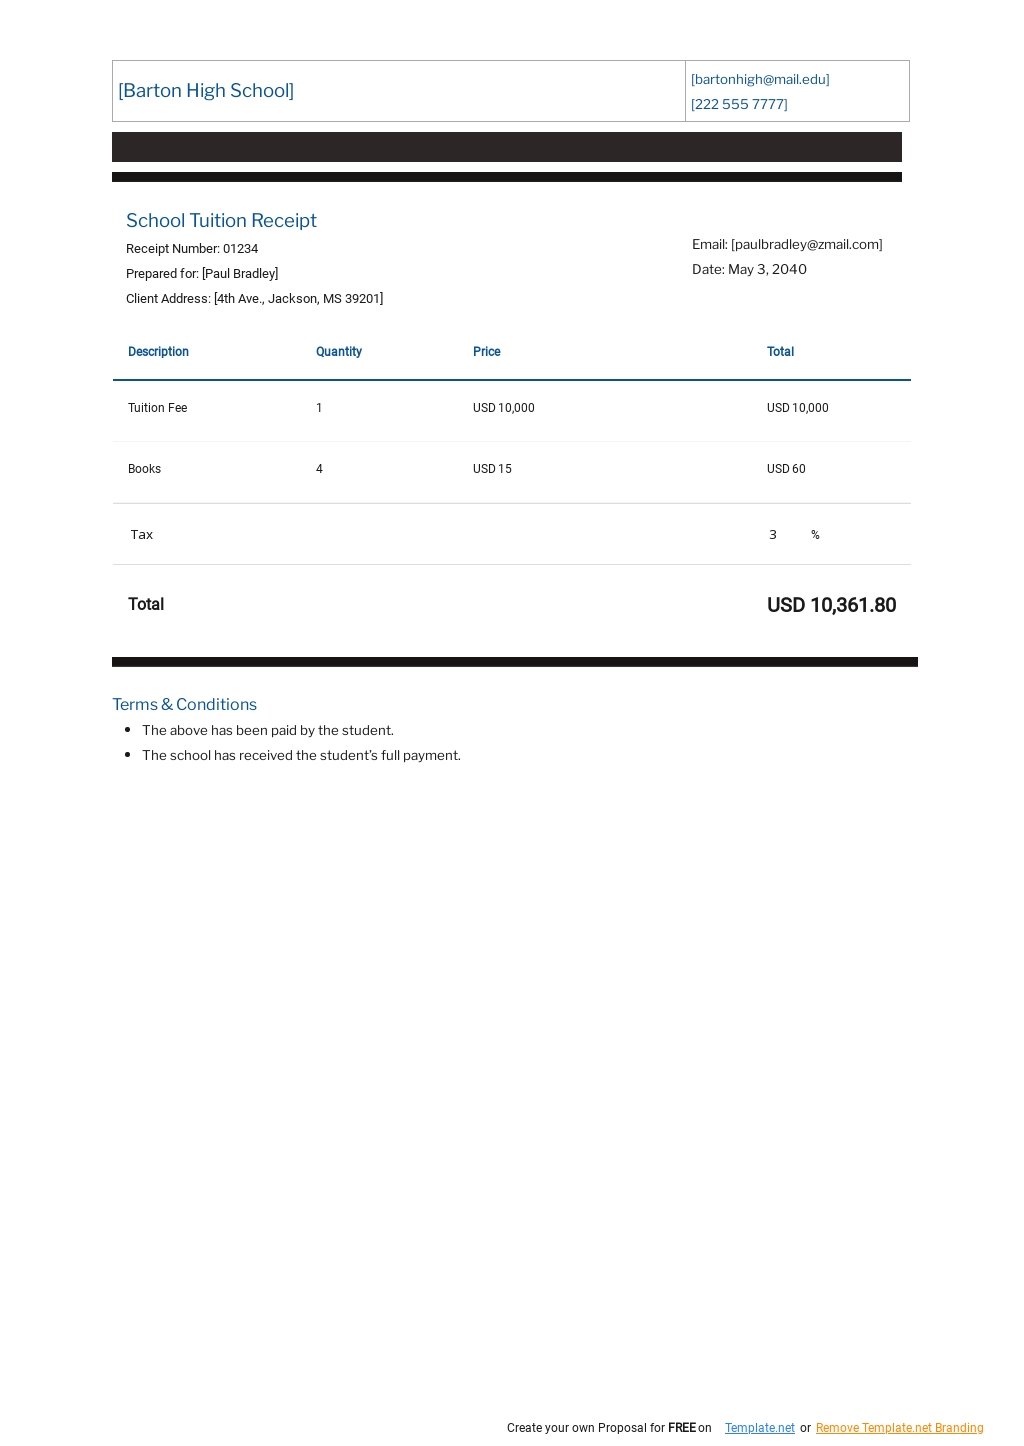 School Tuition Receipt Template - Google Docs, Google Sheets, Excel, Word